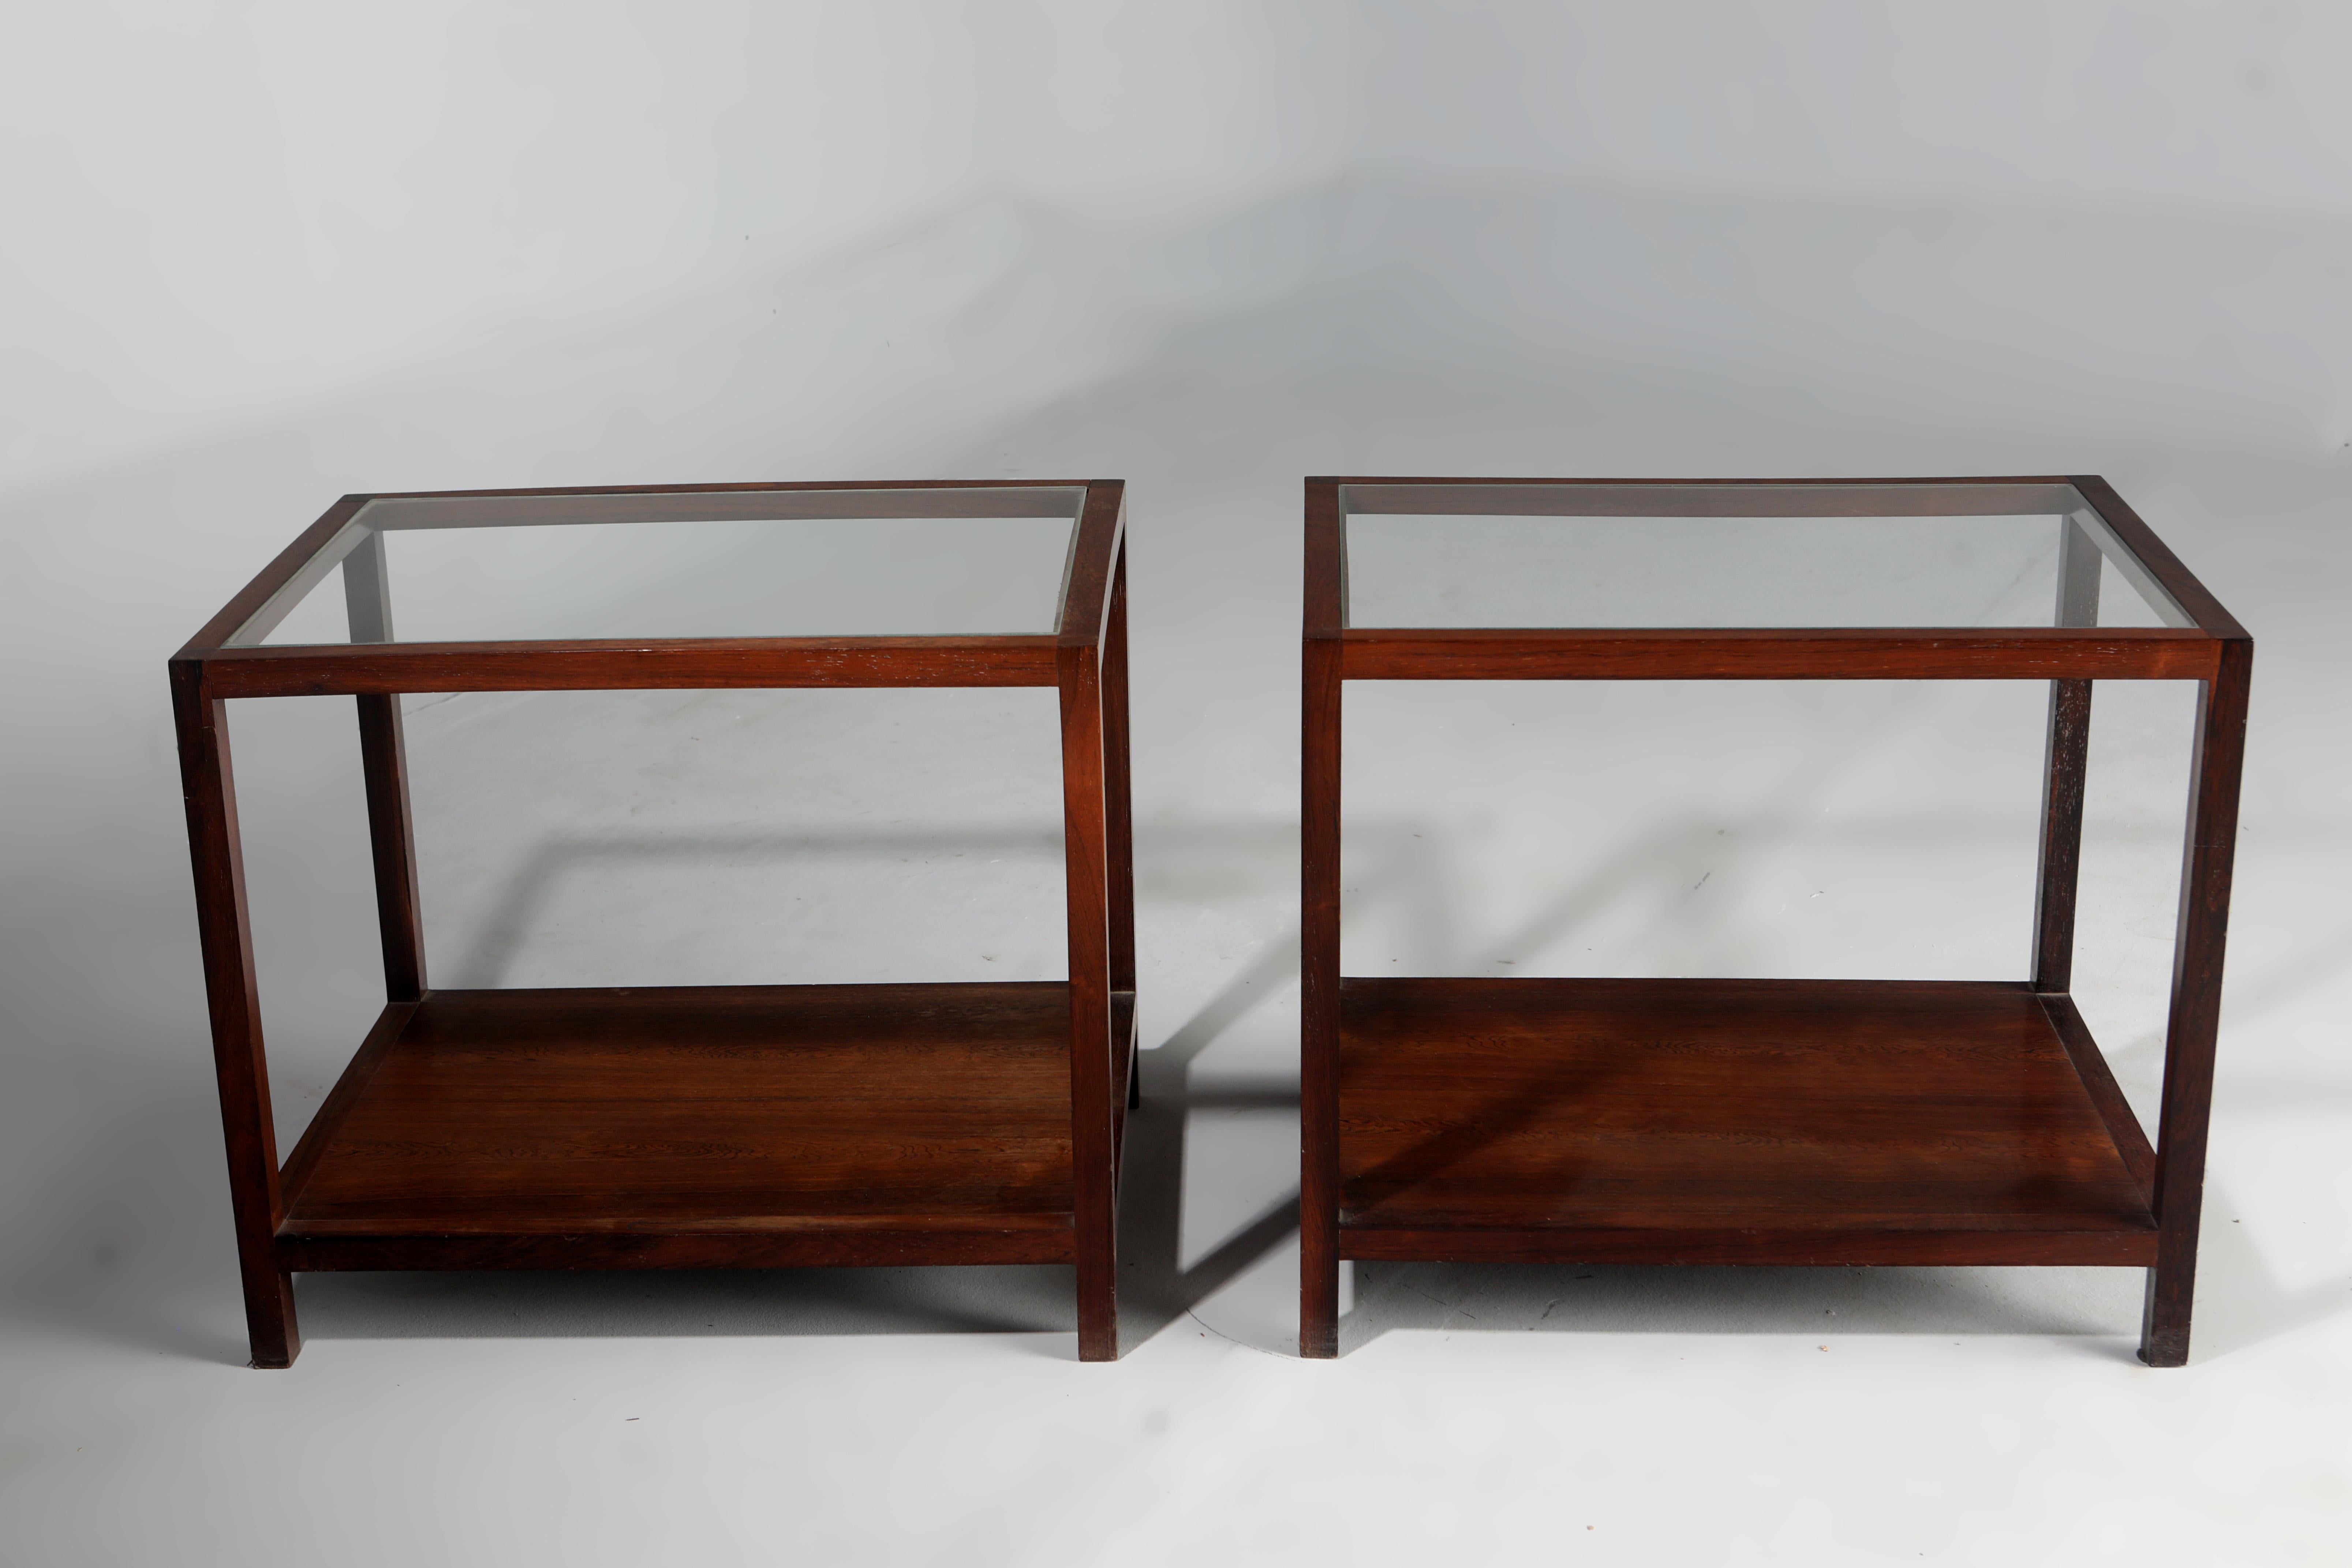 Varnished Mid-Century Modern Pair of Side Tables by Joaquim Tenreiro, Brazil, 1960s For Sale